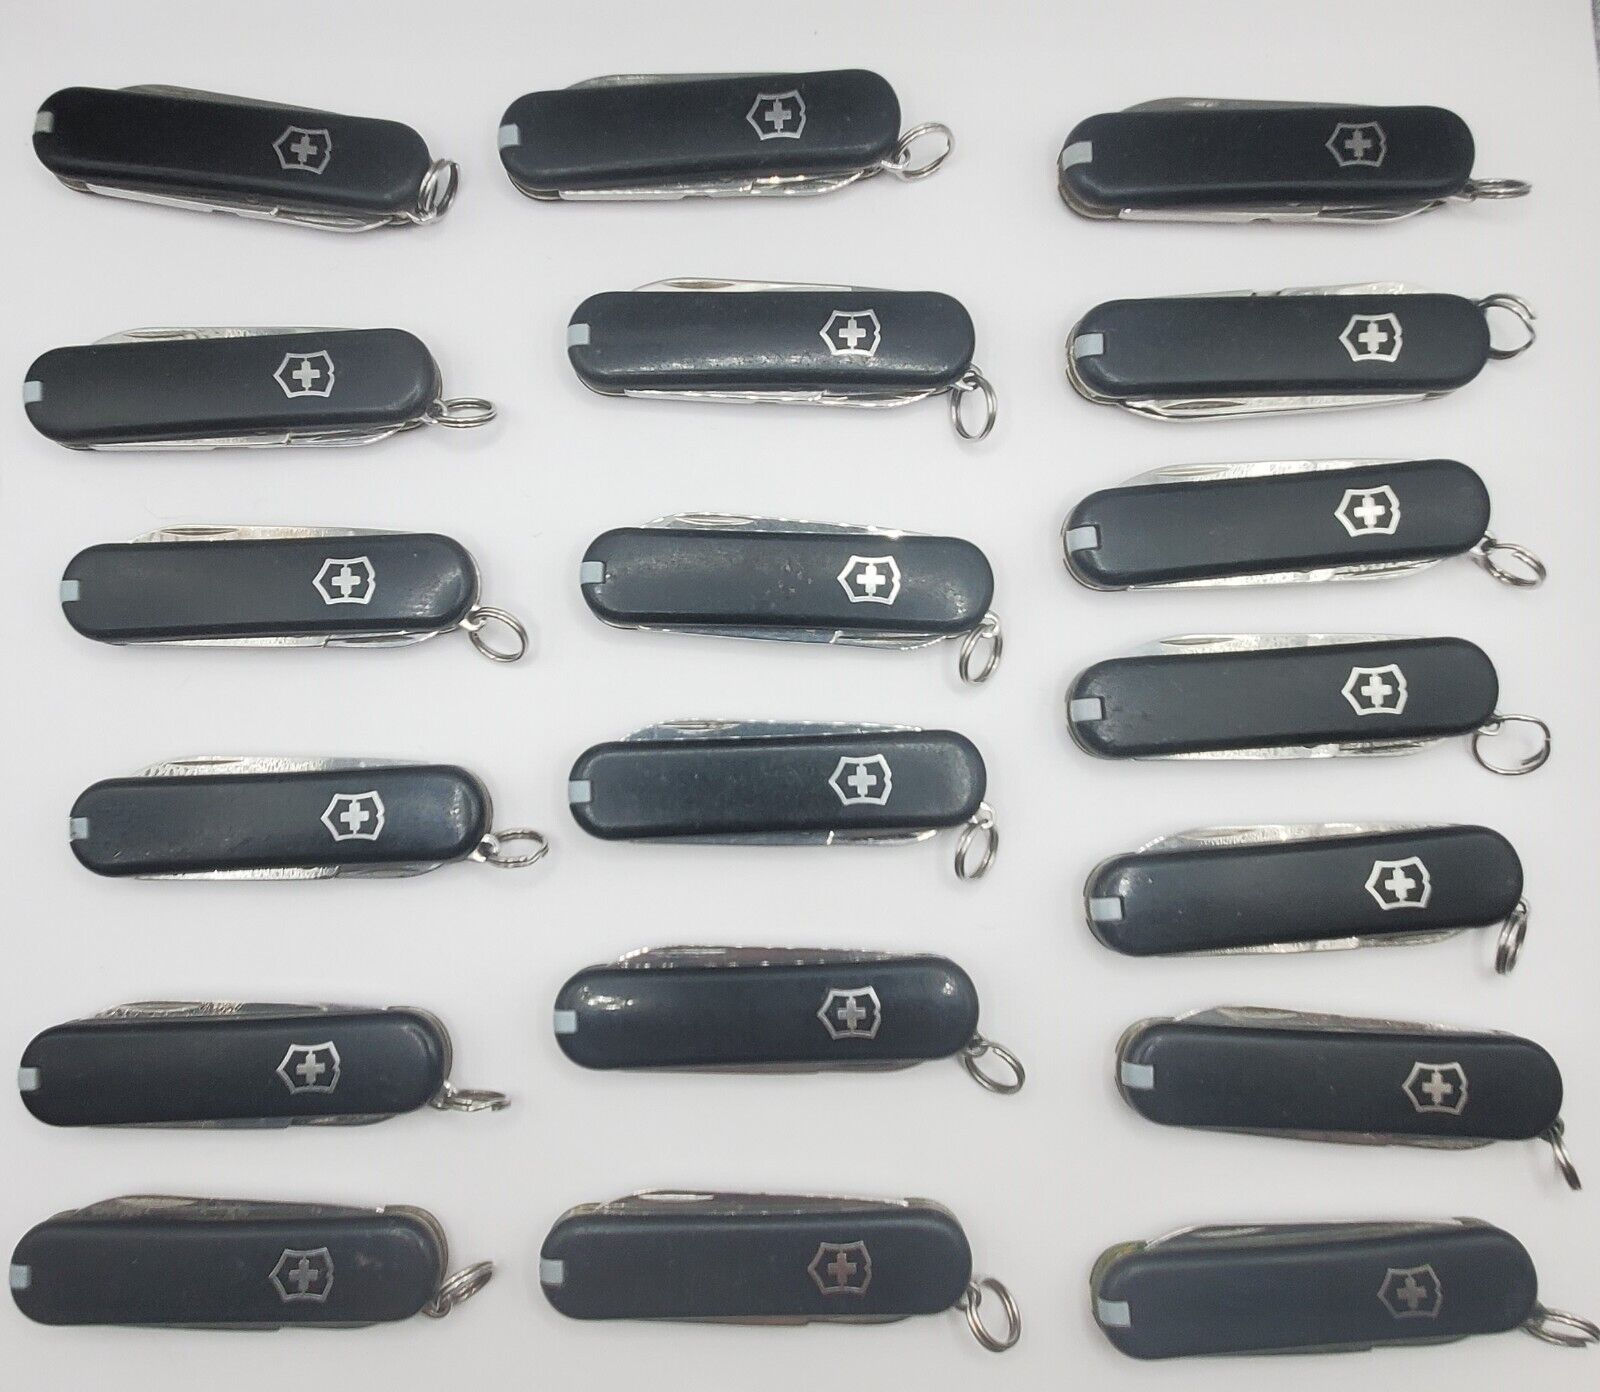 Victorinox Swiss Army Knife Lot of 19 Classic SD Black Color  Pocket Knife USED